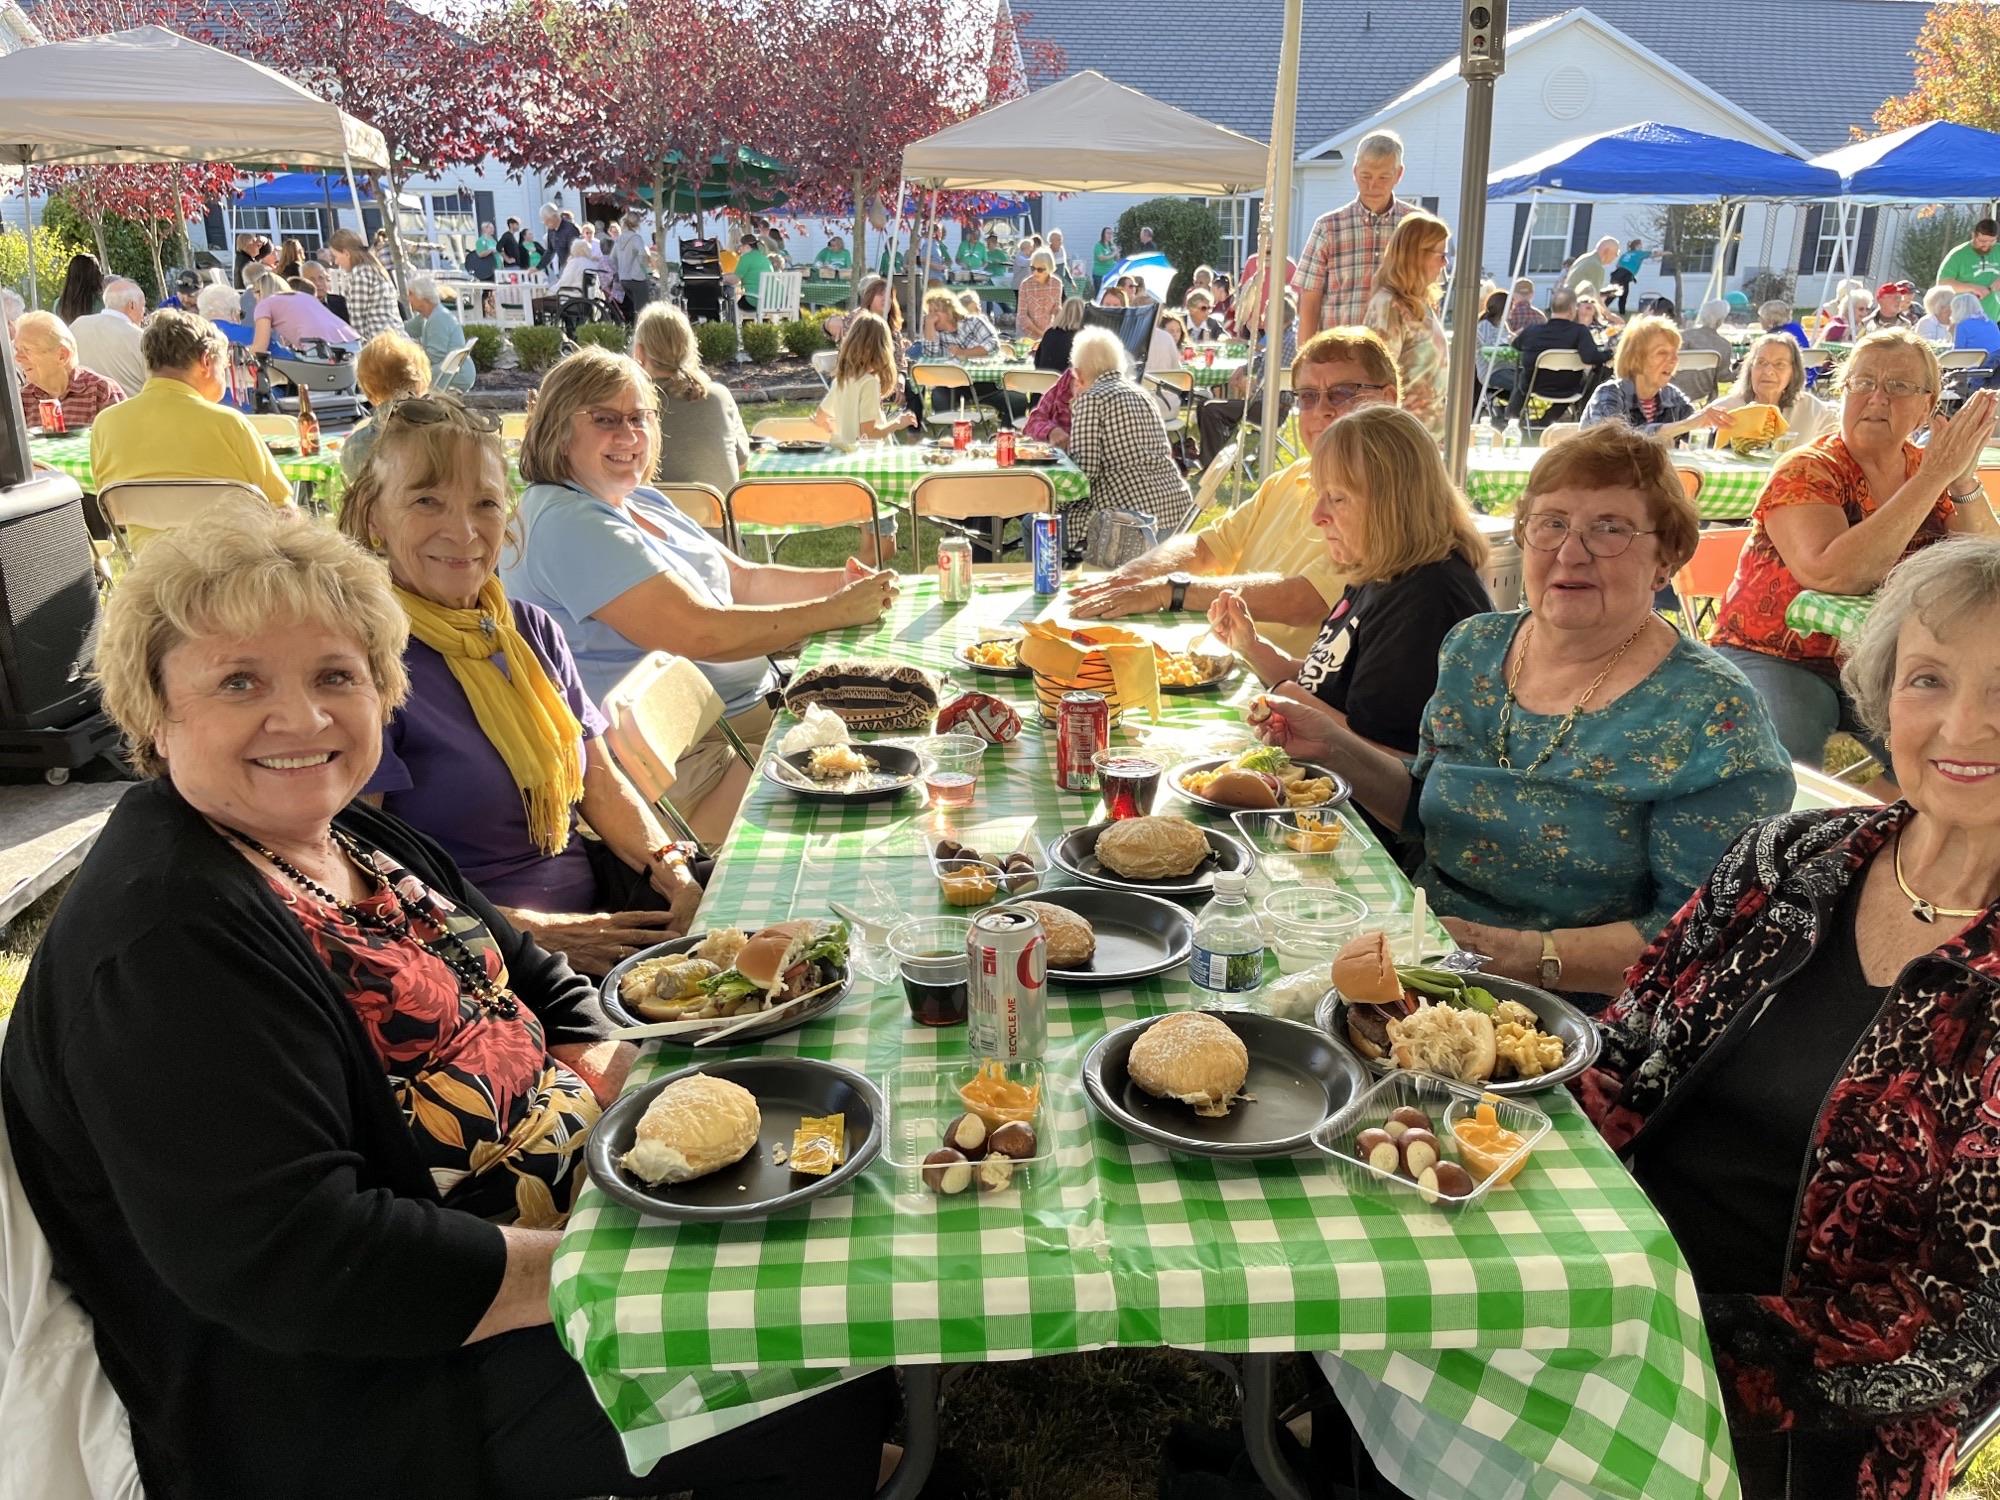 Happy people enjoying an outdoor picnic with a green checkered tablecloth and food